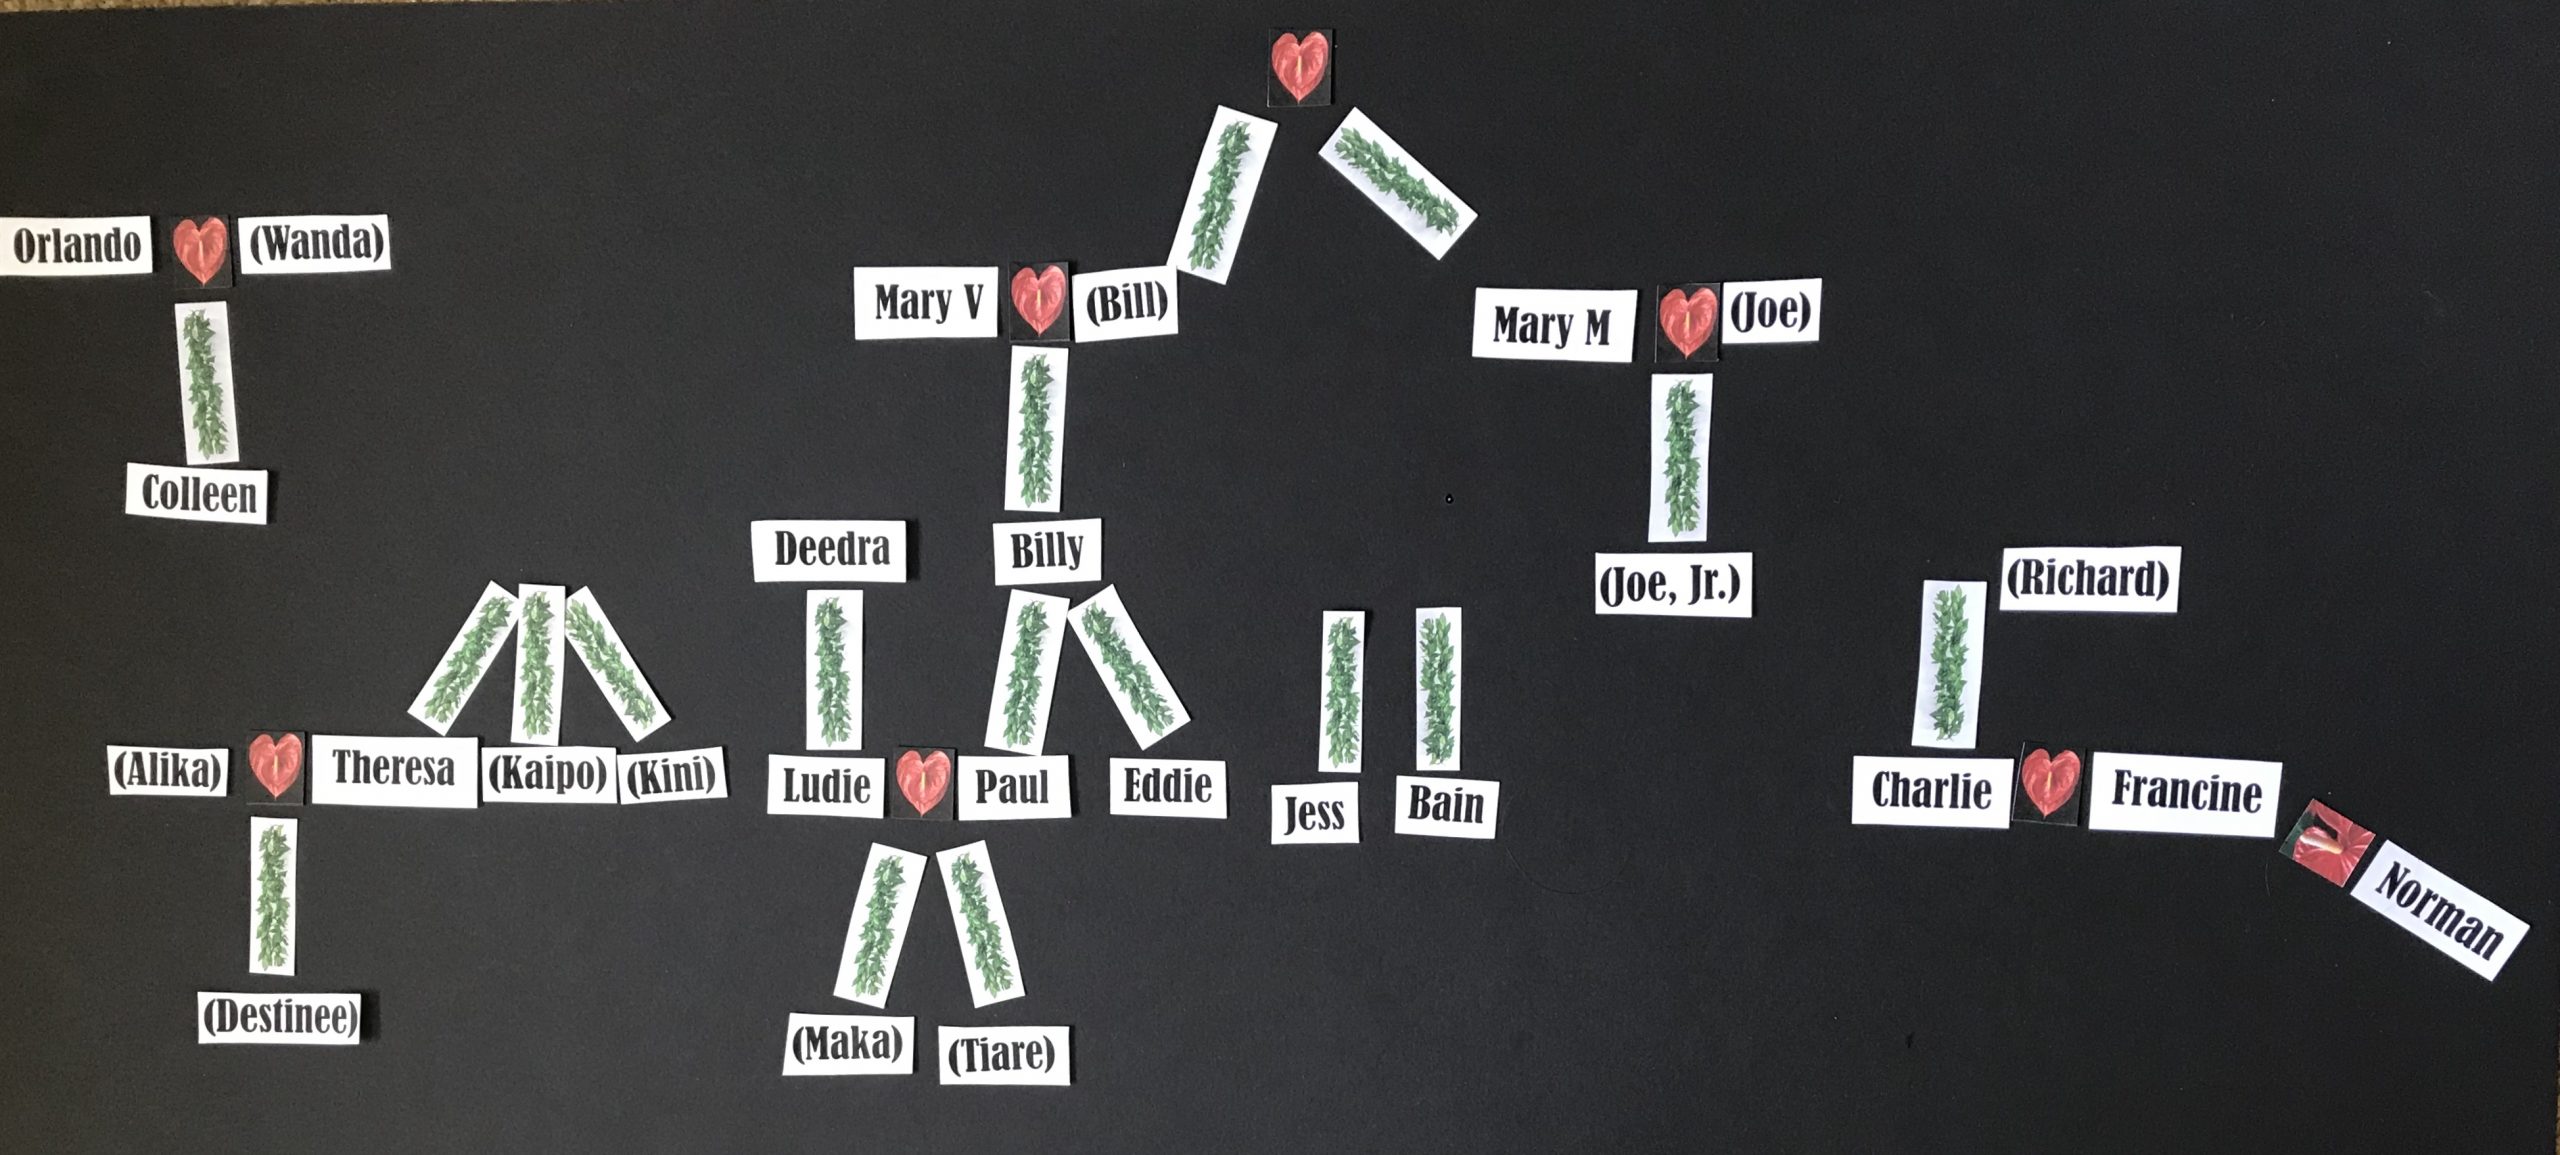 Black background with labels of names and linking green foliage between them to show the family tree of the characters in the play Flowers of Hawai`i. Text on image from left to right by grouping: "Orlando + (Wanda) = Colleen. (Alika + Theresa (Kaipo) (Kini) = Destinee. Mary V + (Bill) = Billy = Paul & Eddie. Deedra = Ludie. Ludie + Paul = (Maka) & (Tiare). Jess. Bain. Mary M. + (Joe) = (Joe, Jr.). (Richard) = Charlie + Francine + Norman